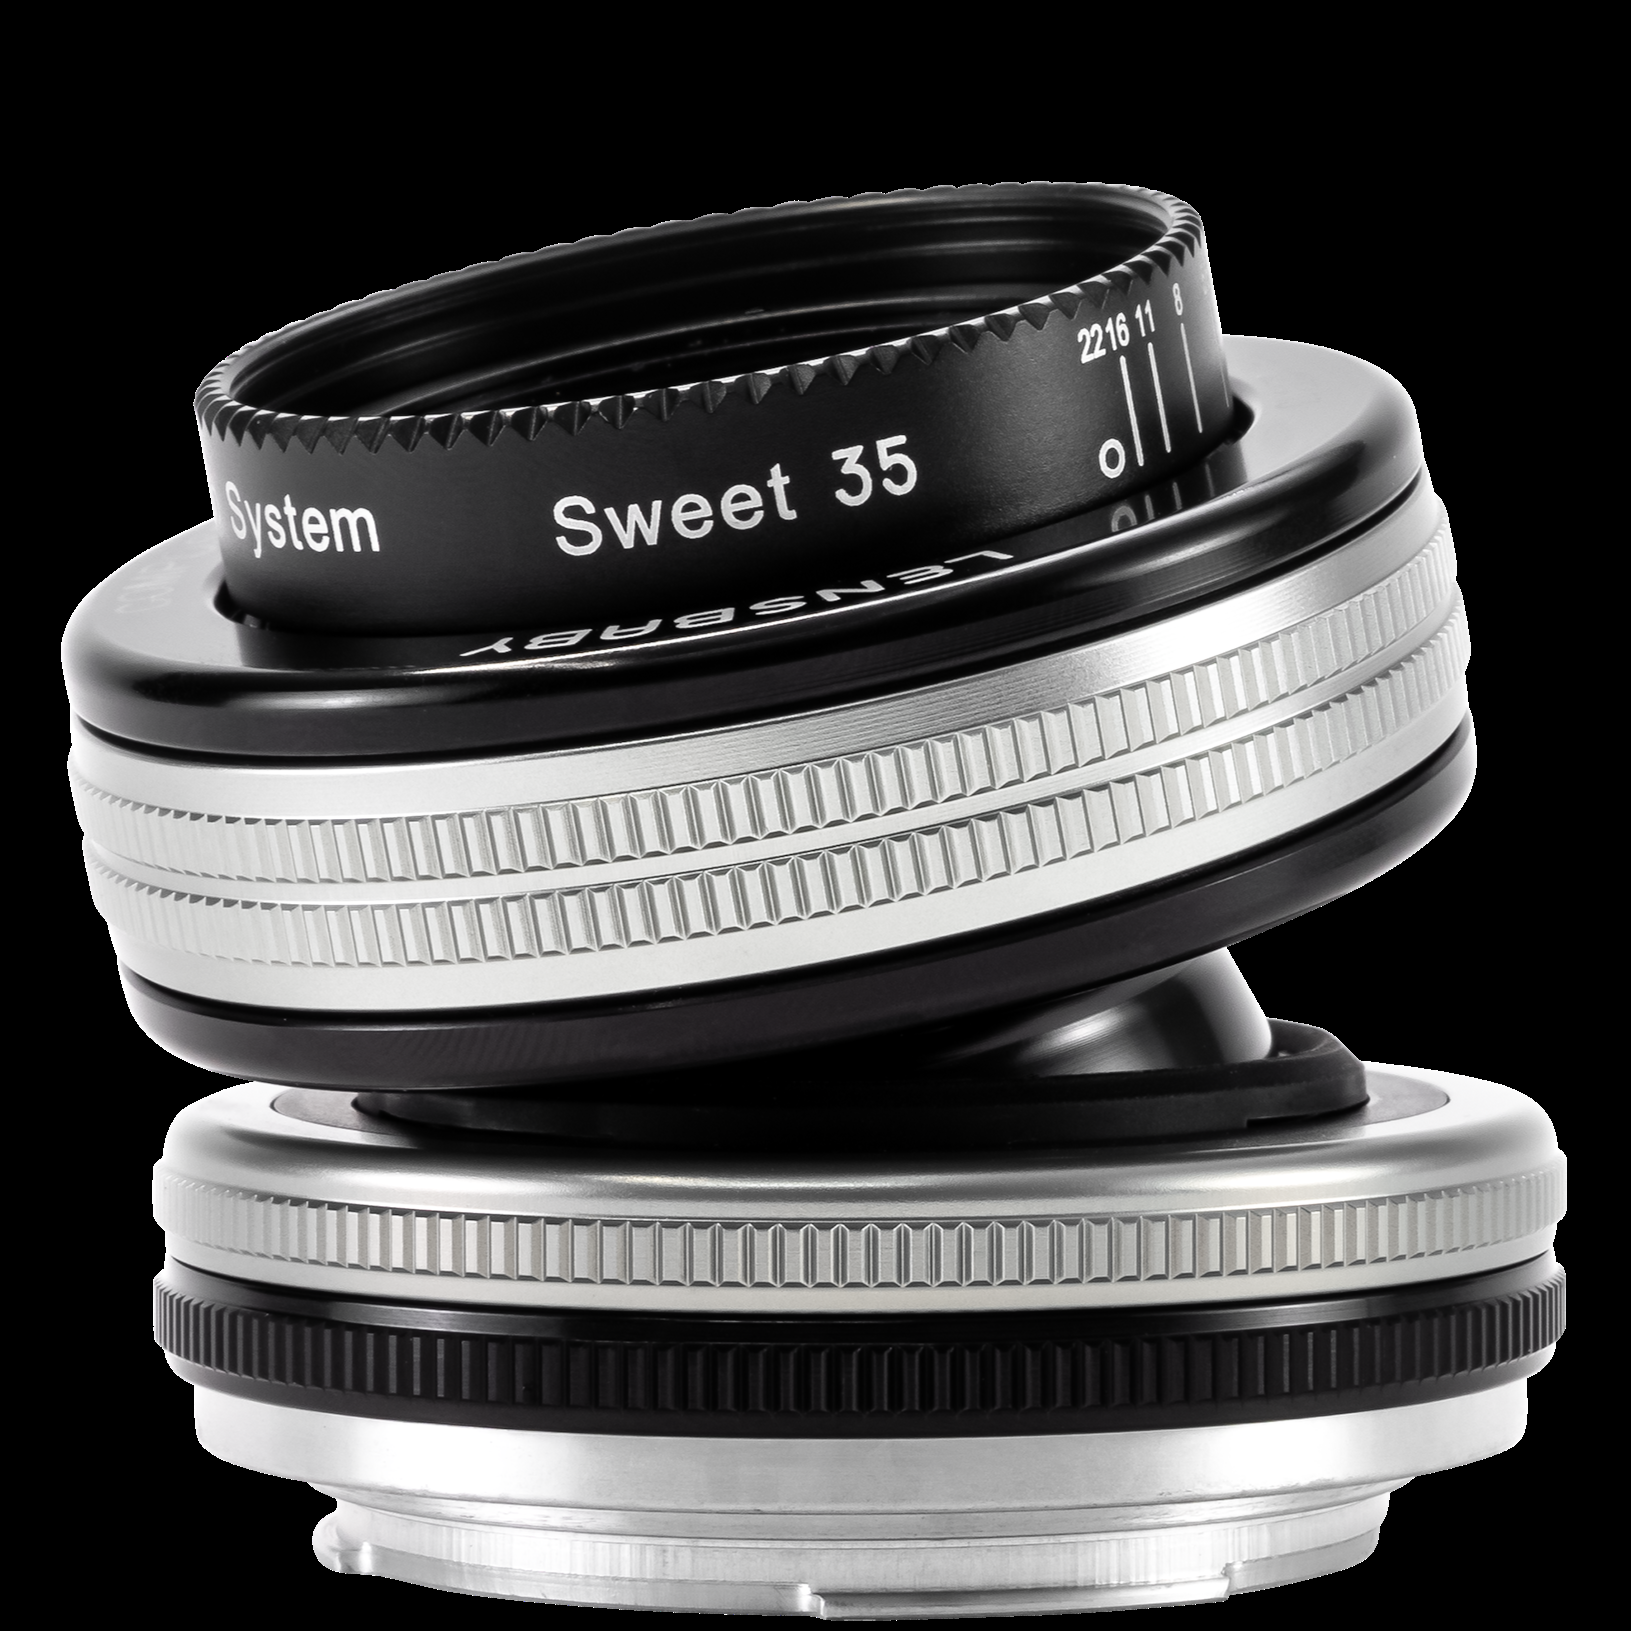 Lensbaby Composer Pro II with Sweet 35 Optic for Nikon F